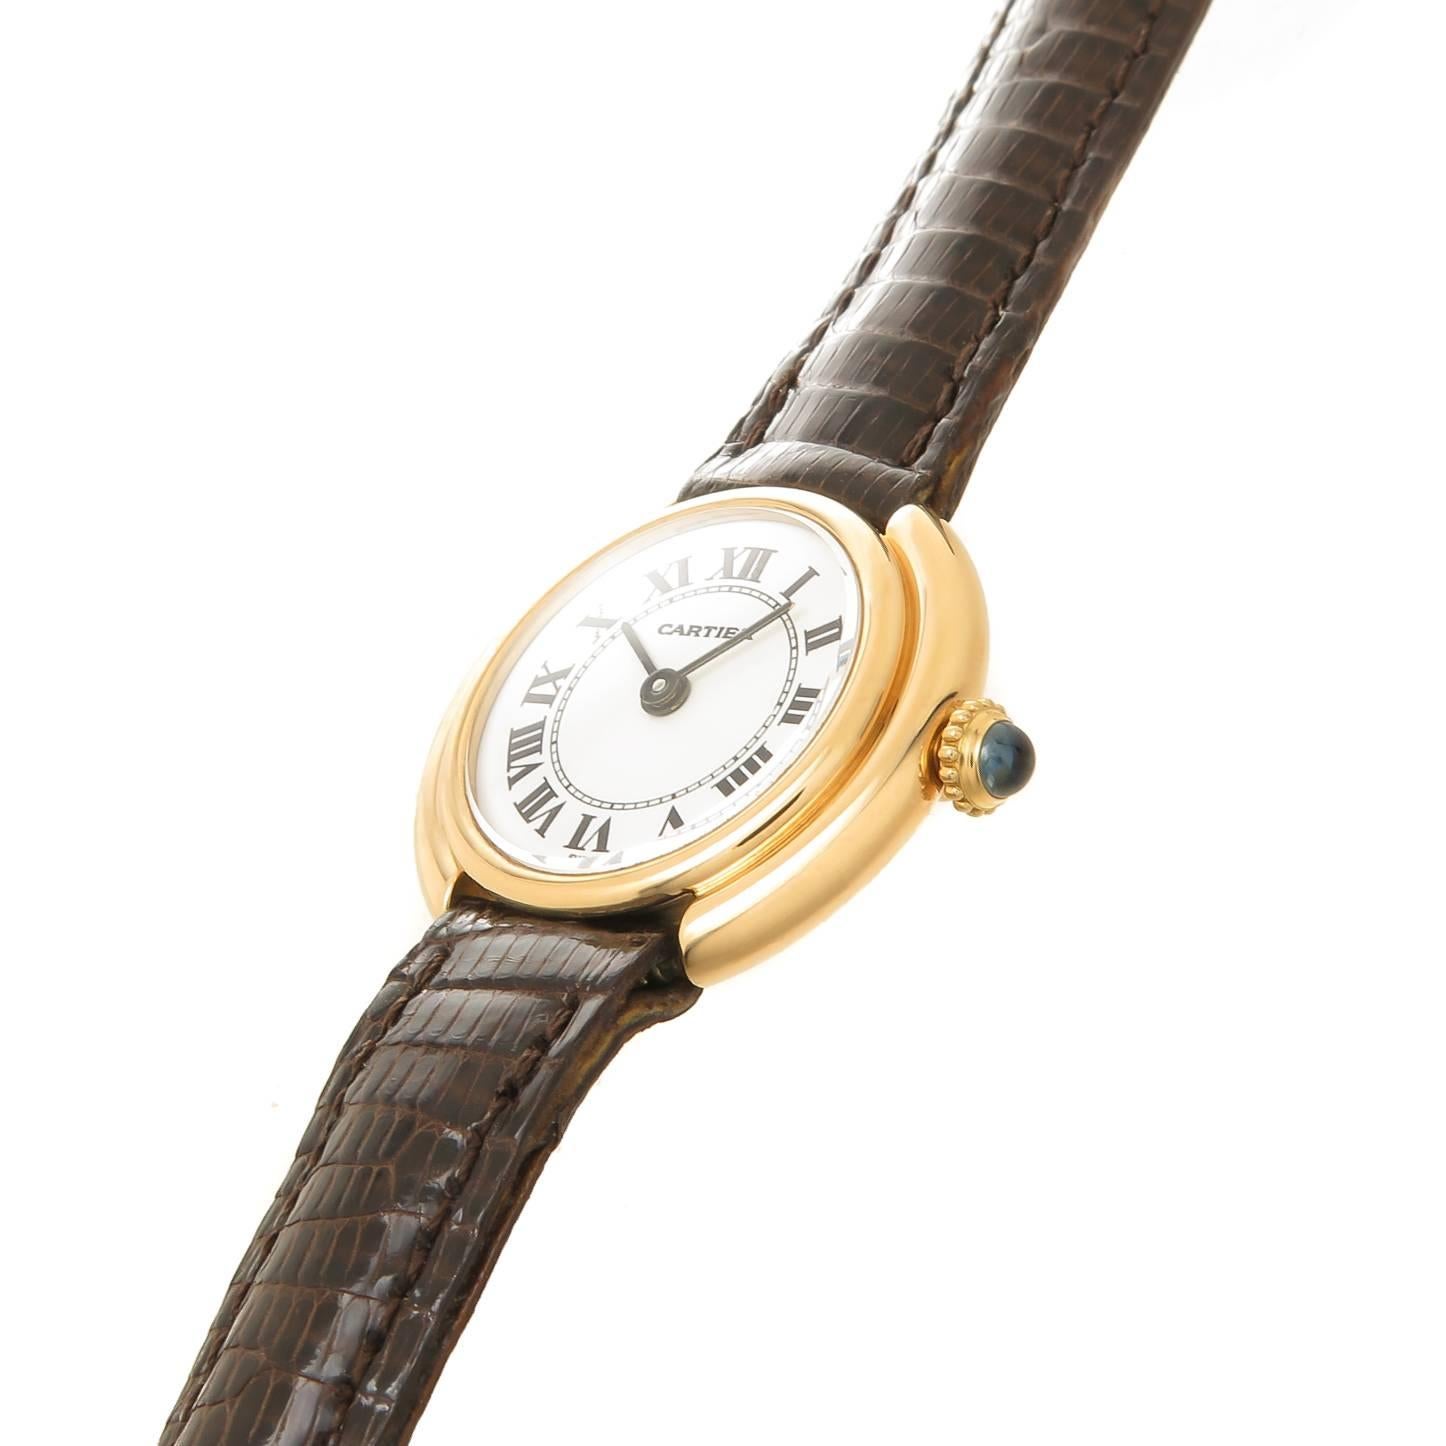 Circa 1970s Cartier Ceinture Ladies Wrist Watch, 26 X 23 MM 18K Yellow Gold Case, mechanical, Manual wind Movement, White Dial with Black Roman Numerals, Sapphire Crown. New DeBeers Paris, brown Lizard Strap with original Cartier gold plated Tang